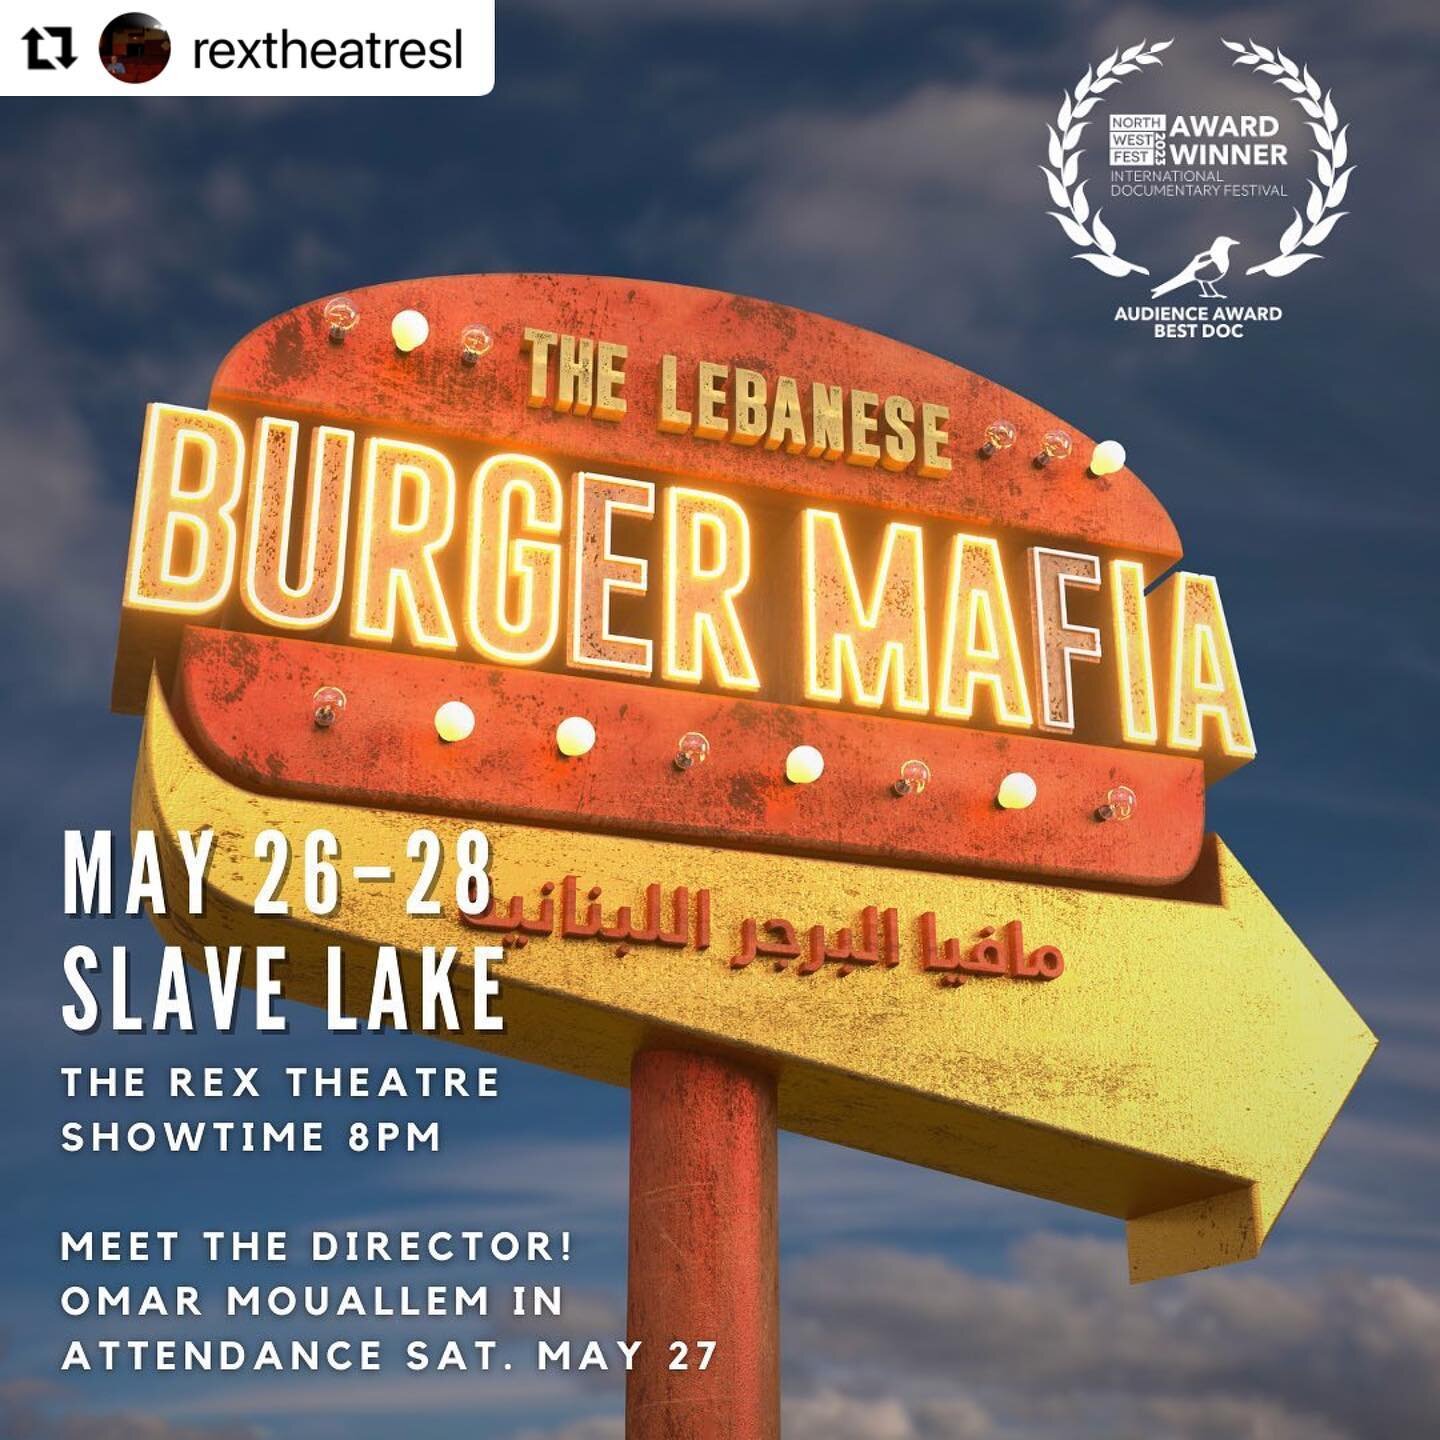 WE&rsquo;RE COMING HOME FAM! See you in Slave Lake &mdash; birthplace of Omar Mouallem and the town where his father learned the trade secrets. Thank you @k_mouallem and @landmarkcinemas for making it happen! (Details below) 

#Repost @rextheatresl w